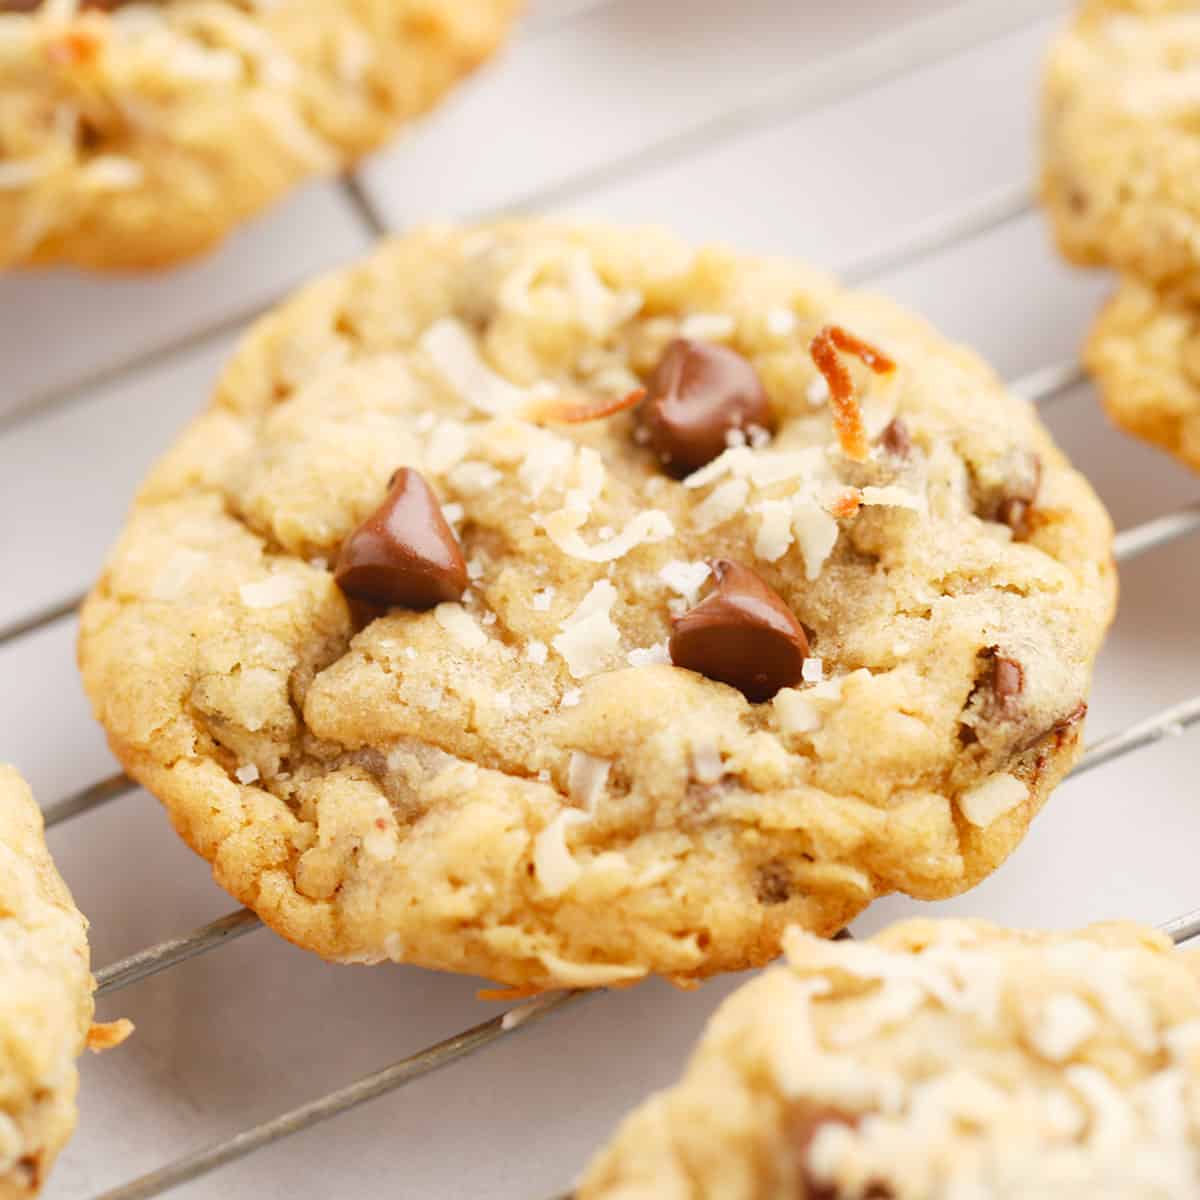 cowboy cookies with coconut and chocolate chips